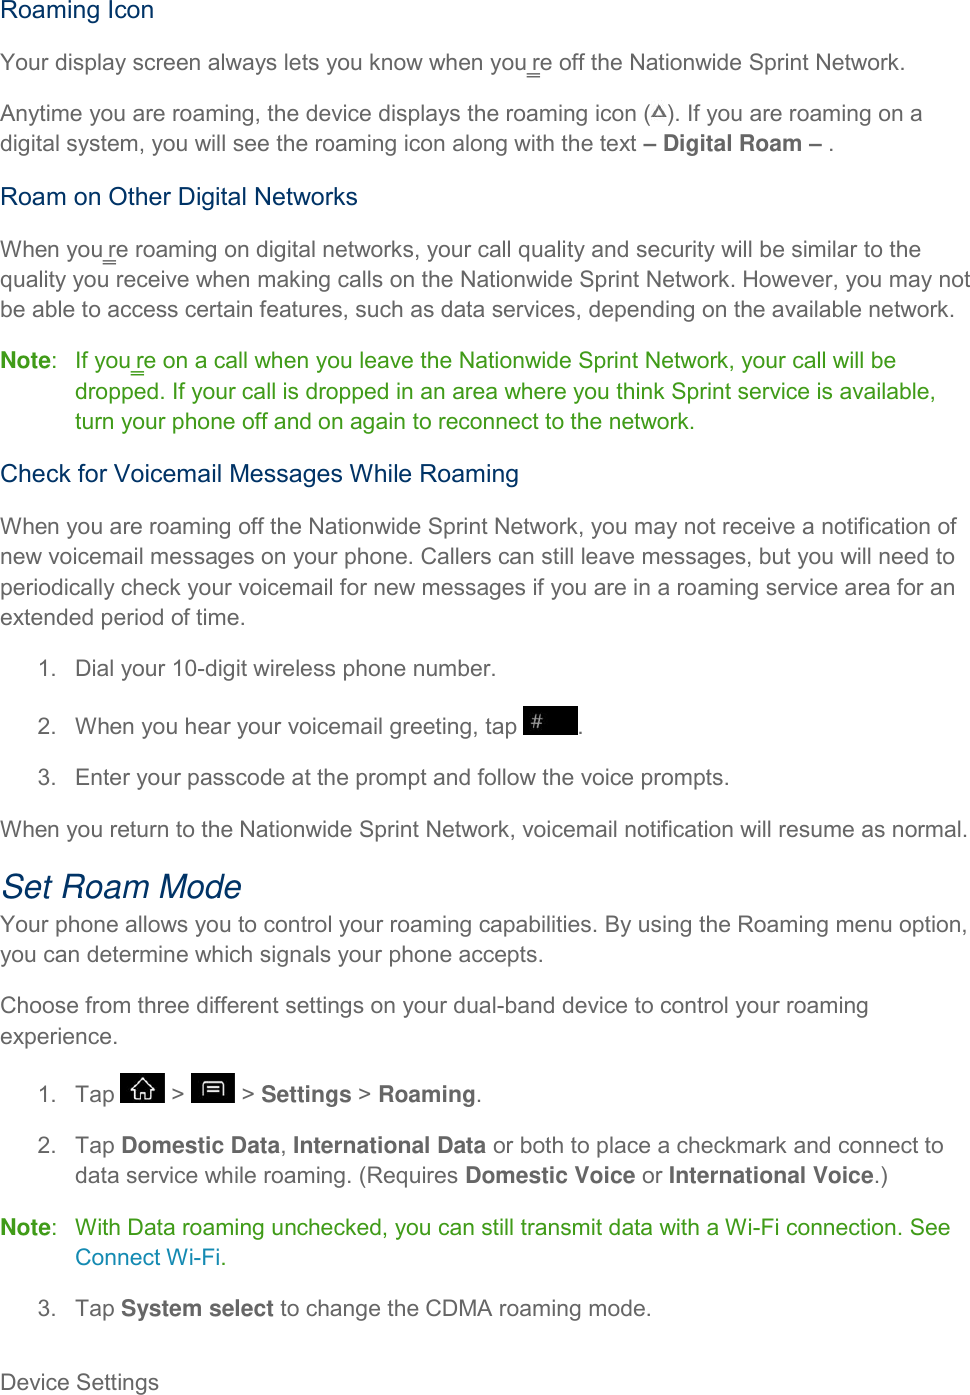 Device Settings     Roaming Icon Your display screen always lets you know when you‗re off the Nationwide Sprint Network.  Anytime you are roaming, the device displays the roaming icon ( ). If you are roaming on a digital system, you will see the roaming icon along with the text – Digital Roam – . Roam on Other Digital Networks When you‗re roaming on digital networks, your call quality and security will be similar to the quality you receive when making calls on the Nationwide Sprint Network. However, you may not be able to access certain features, such as data services, depending on the available network. Note:   If you‗re on a call when you leave the Nationwide Sprint Network, your call will be dropped. If your call is dropped in an area where you think Sprint service is available, turn your phone off and on again to reconnect to the network. Check for Voicemail Messages While Roaming When you are roaming off the Nationwide Sprint Network, you may not receive a notification of new voicemail messages on your phone. Callers can still leave messages, but you will need to periodically check your voicemail for new messages if you are in a roaming service area for an extended period of time. 1.  Dial your 10-digit wireless phone number. 2.  When you hear your voicemail greeting, tap  . 3.  Enter your passcode at the prompt and follow the voice prompts. When you return to the Nationwide Sprint Network, voicemail notification will resume as normal. Set Roam Mode Your phone allows you to control your roaming capabilities. By using the Roaming menu option, you can determine which signals your phone accepts. Choose from three different settings on your dual-band device to control your roaming experience. 1.  Tap   &gt;   &gt; Settings &gt; Roaming. 2.  Tap Domestic Data, International Data or both to place a checkmark and connect to data service while roaming. (Requires Domestic Voice or International Voice.) Note:   With Data roaming unchecked, you can still transmit data with a Wi-Fi connection. See Connect Wi-Fi. 3.  Tap System select to change the CDMA roaming mode. 